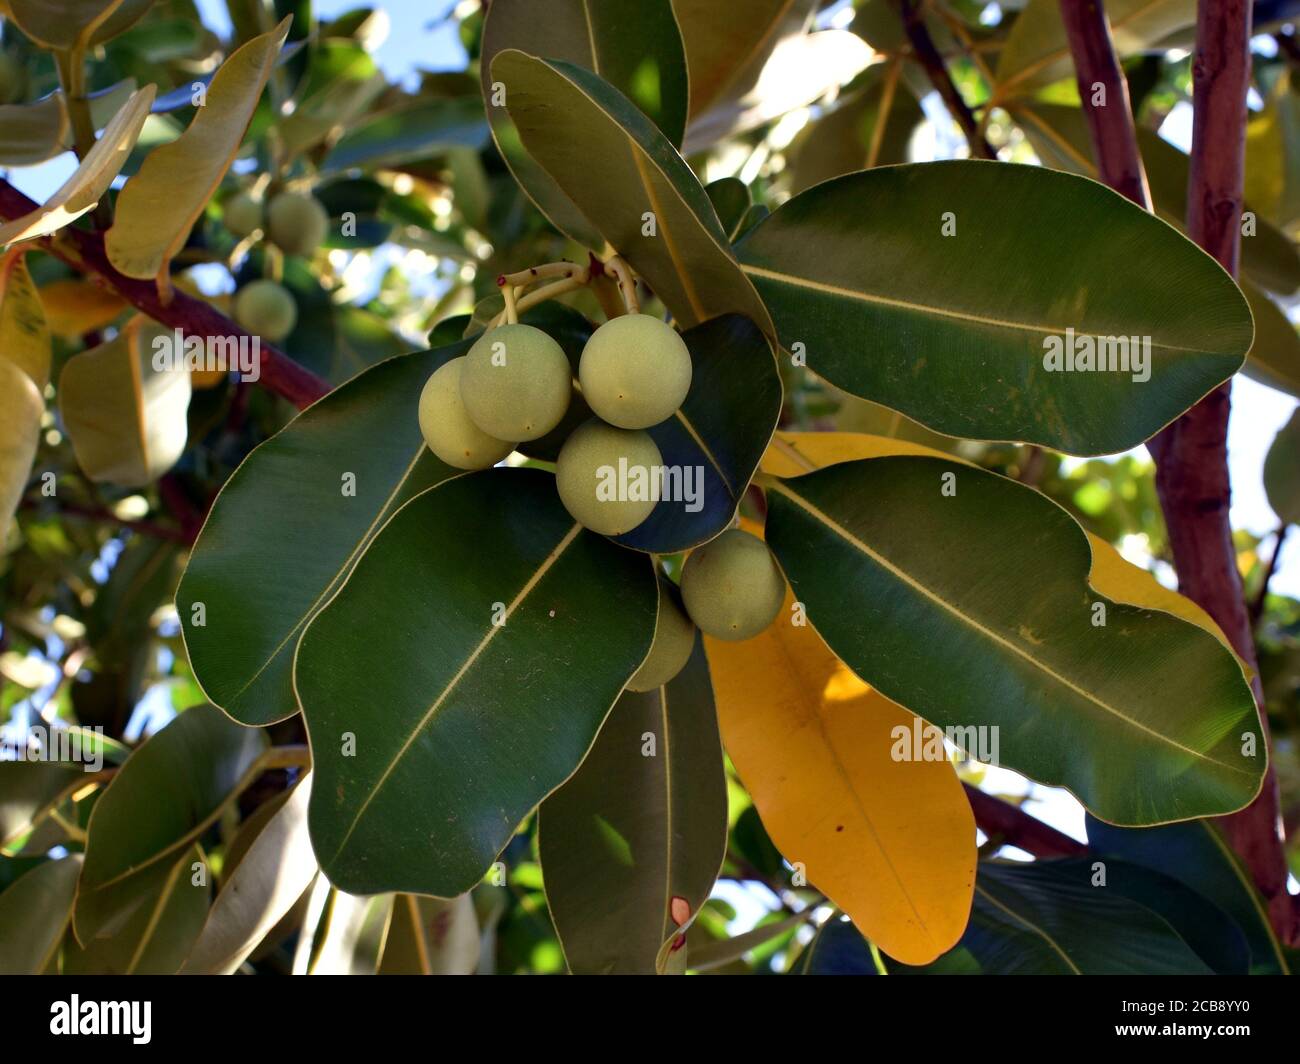 A cluster of seed pods on a tree Stock Photo